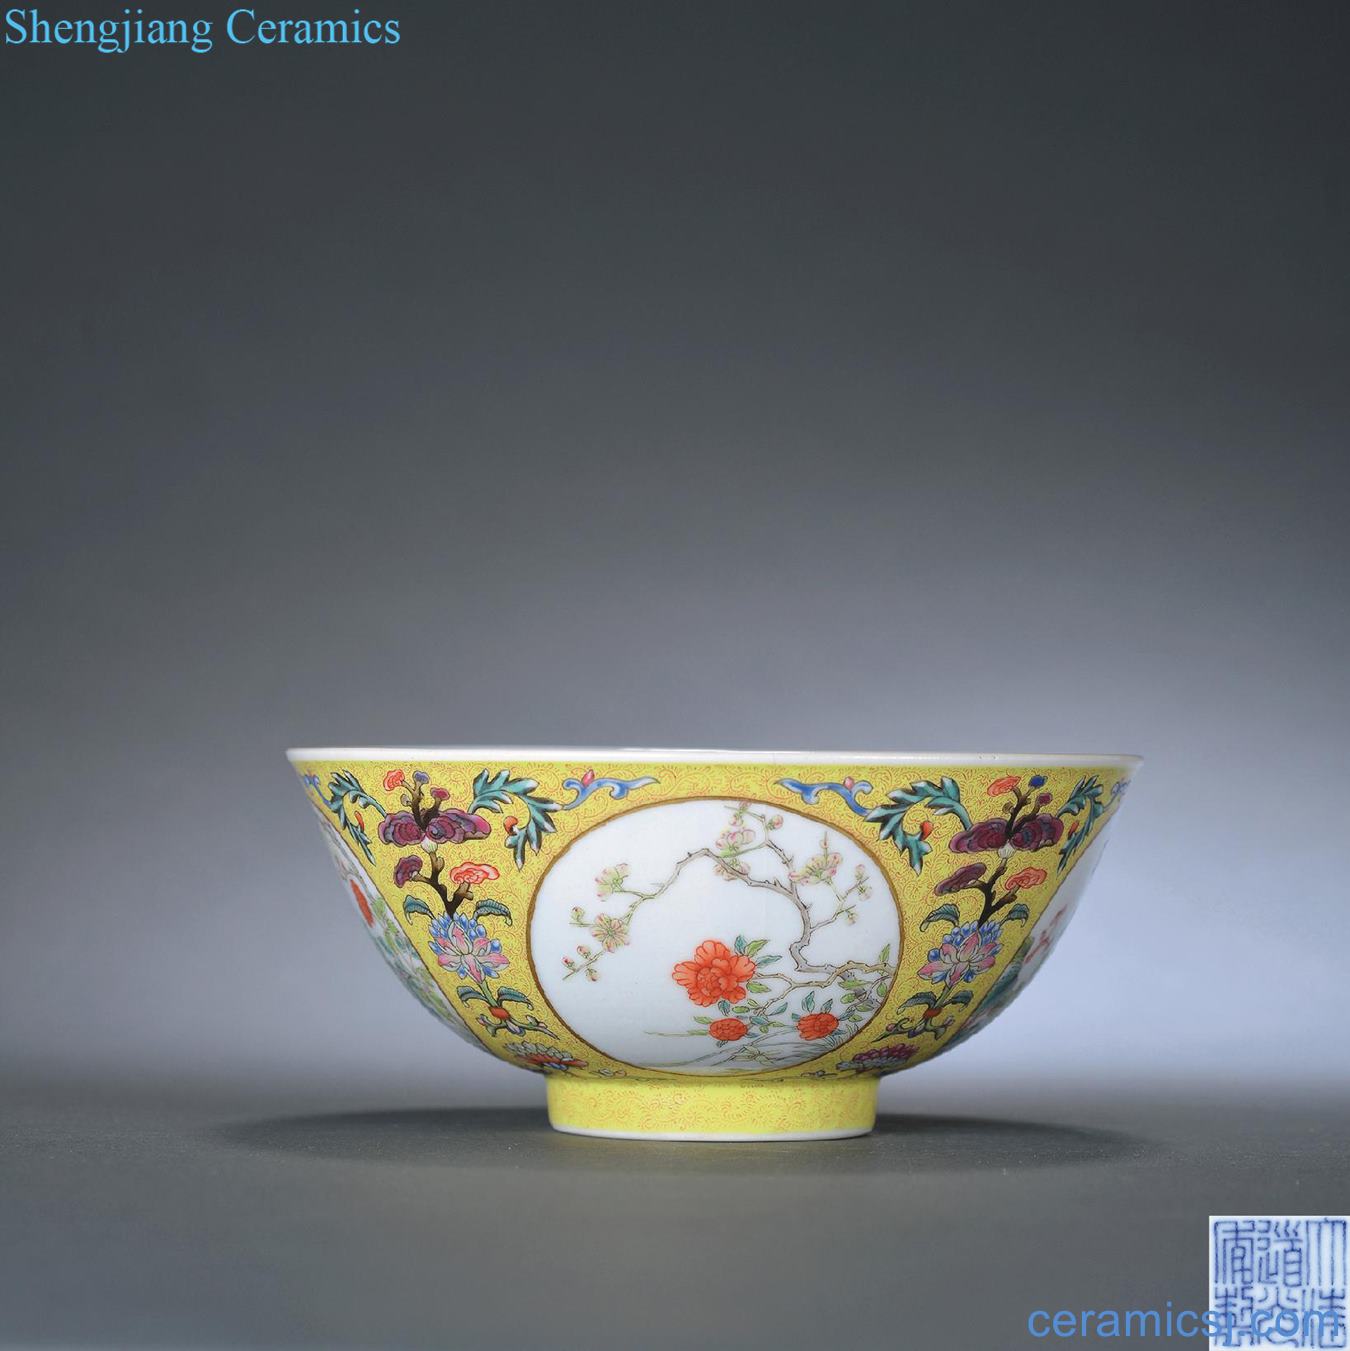 Qing daoguang To pastel yellow medallion four seasons flower bowls